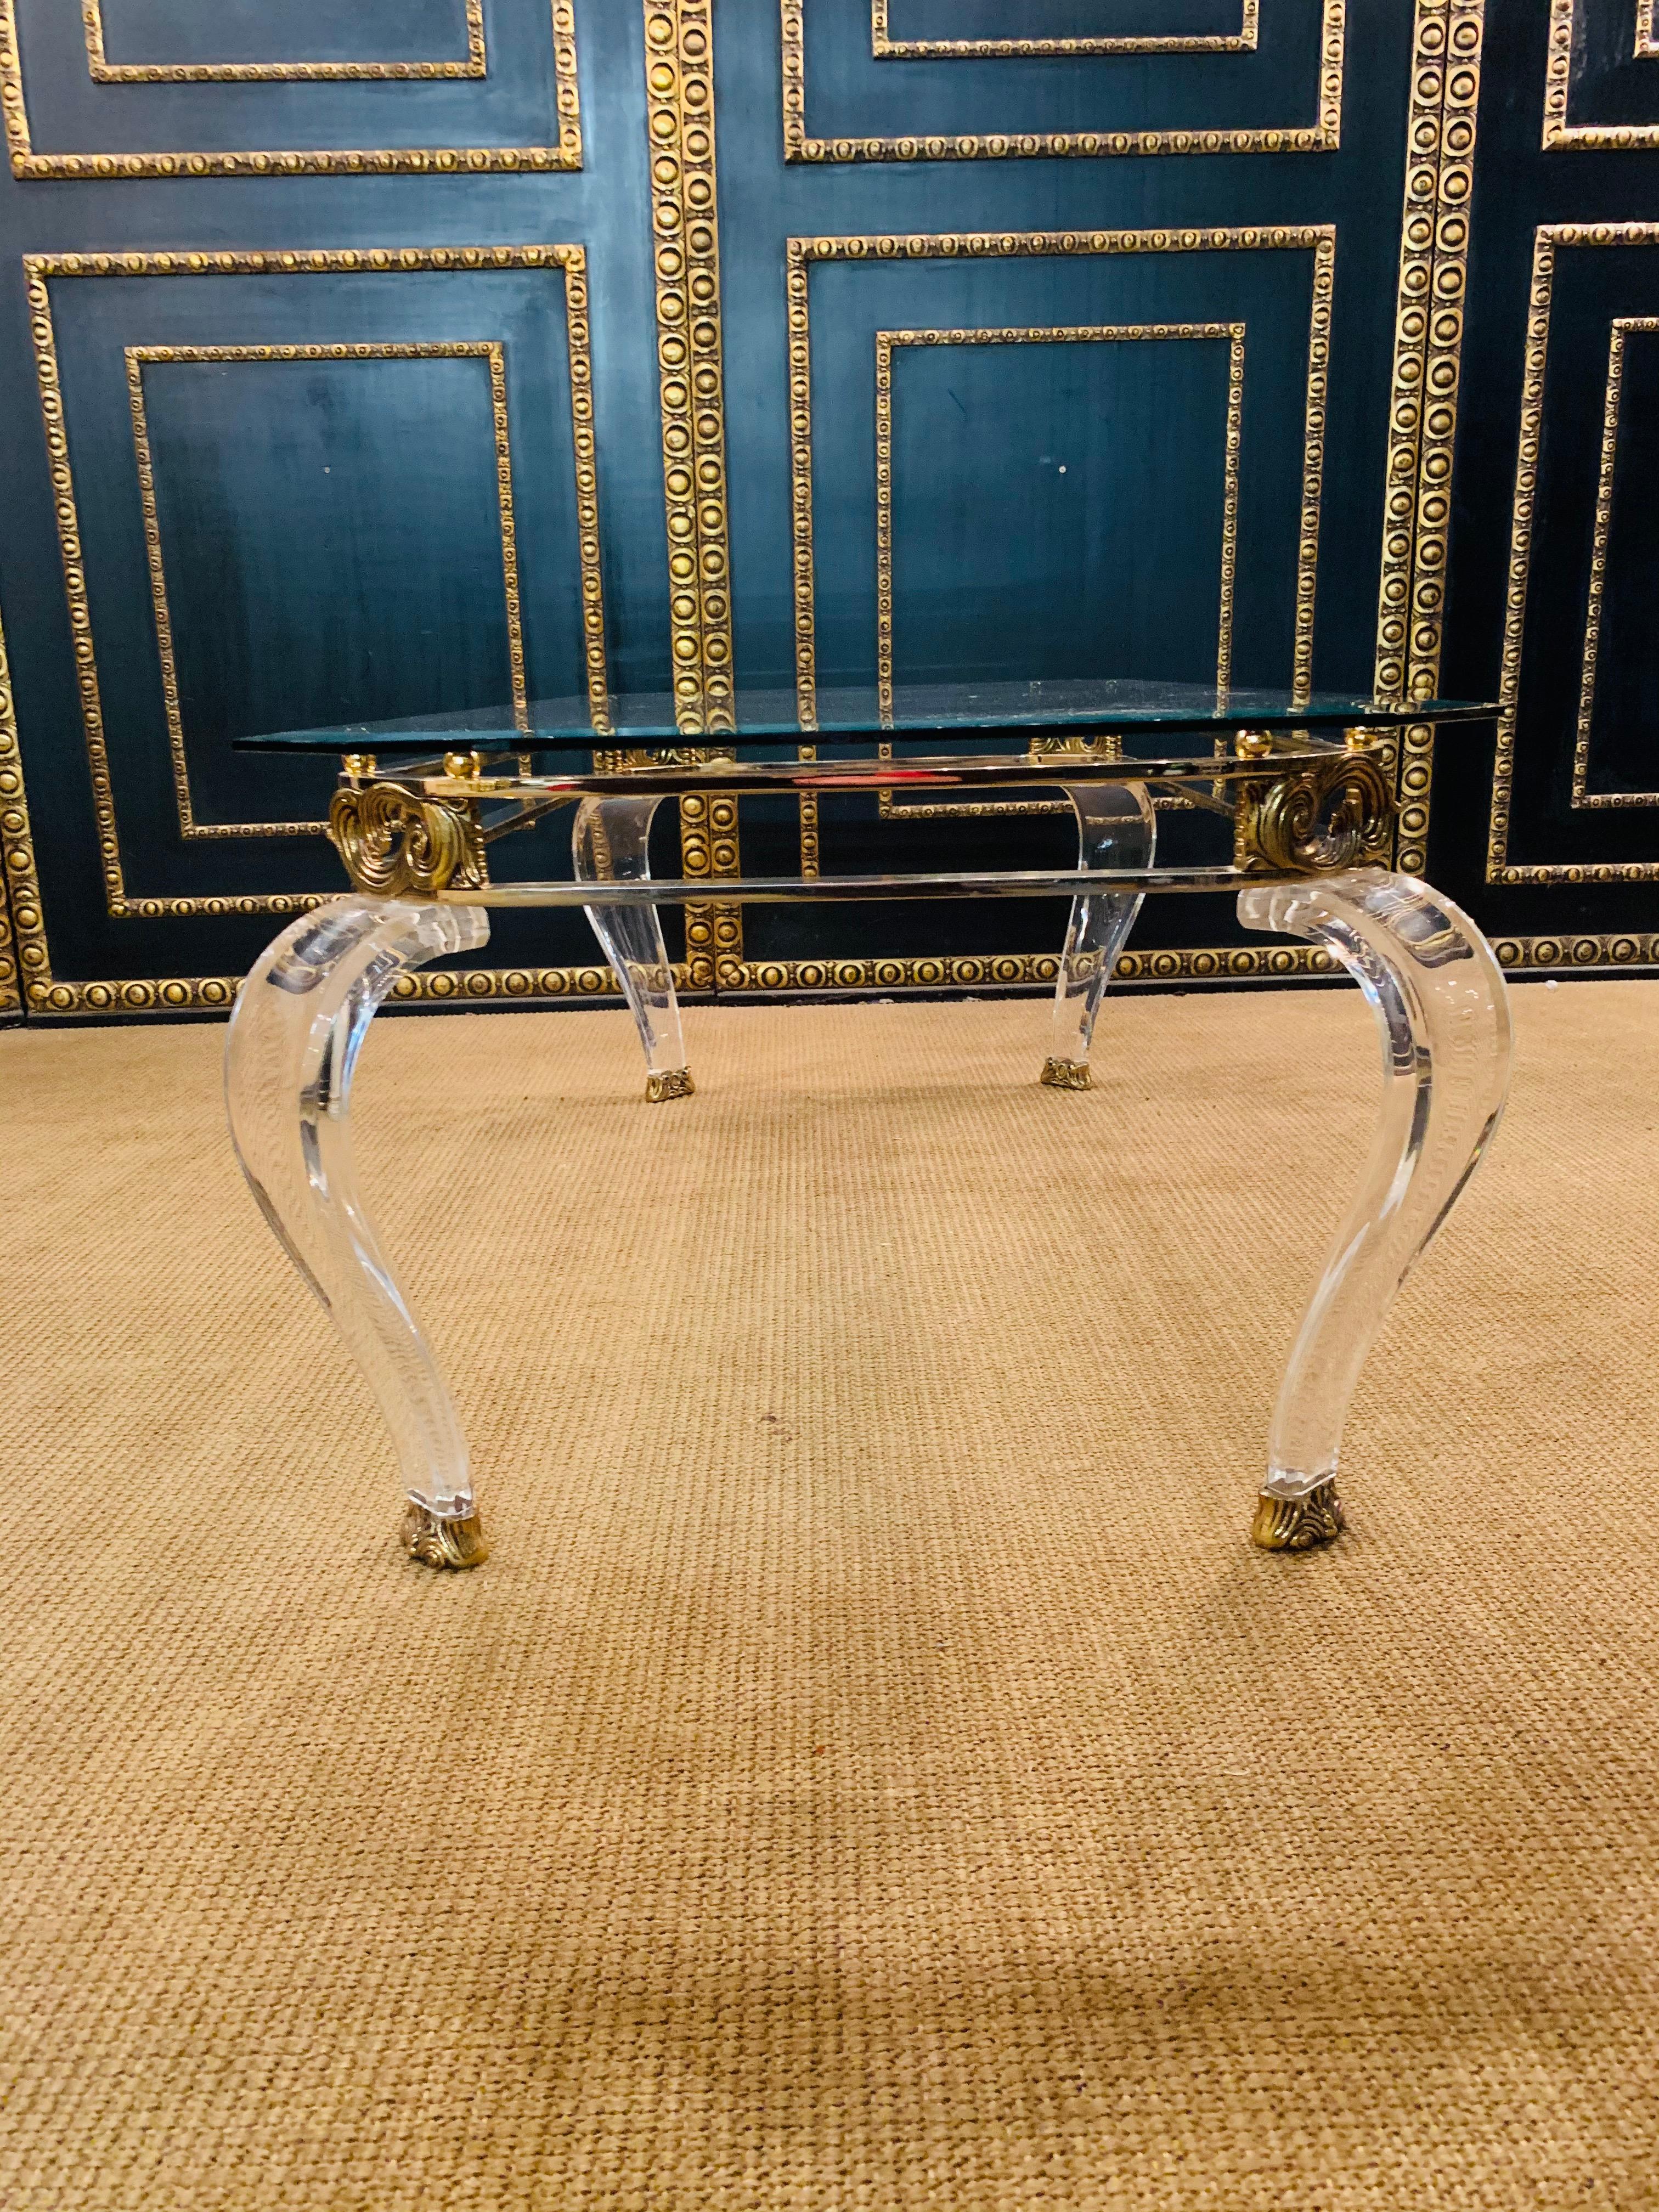 Luxury Table Acrylic with Brass Curved Legs in Acrylic High Quality 8